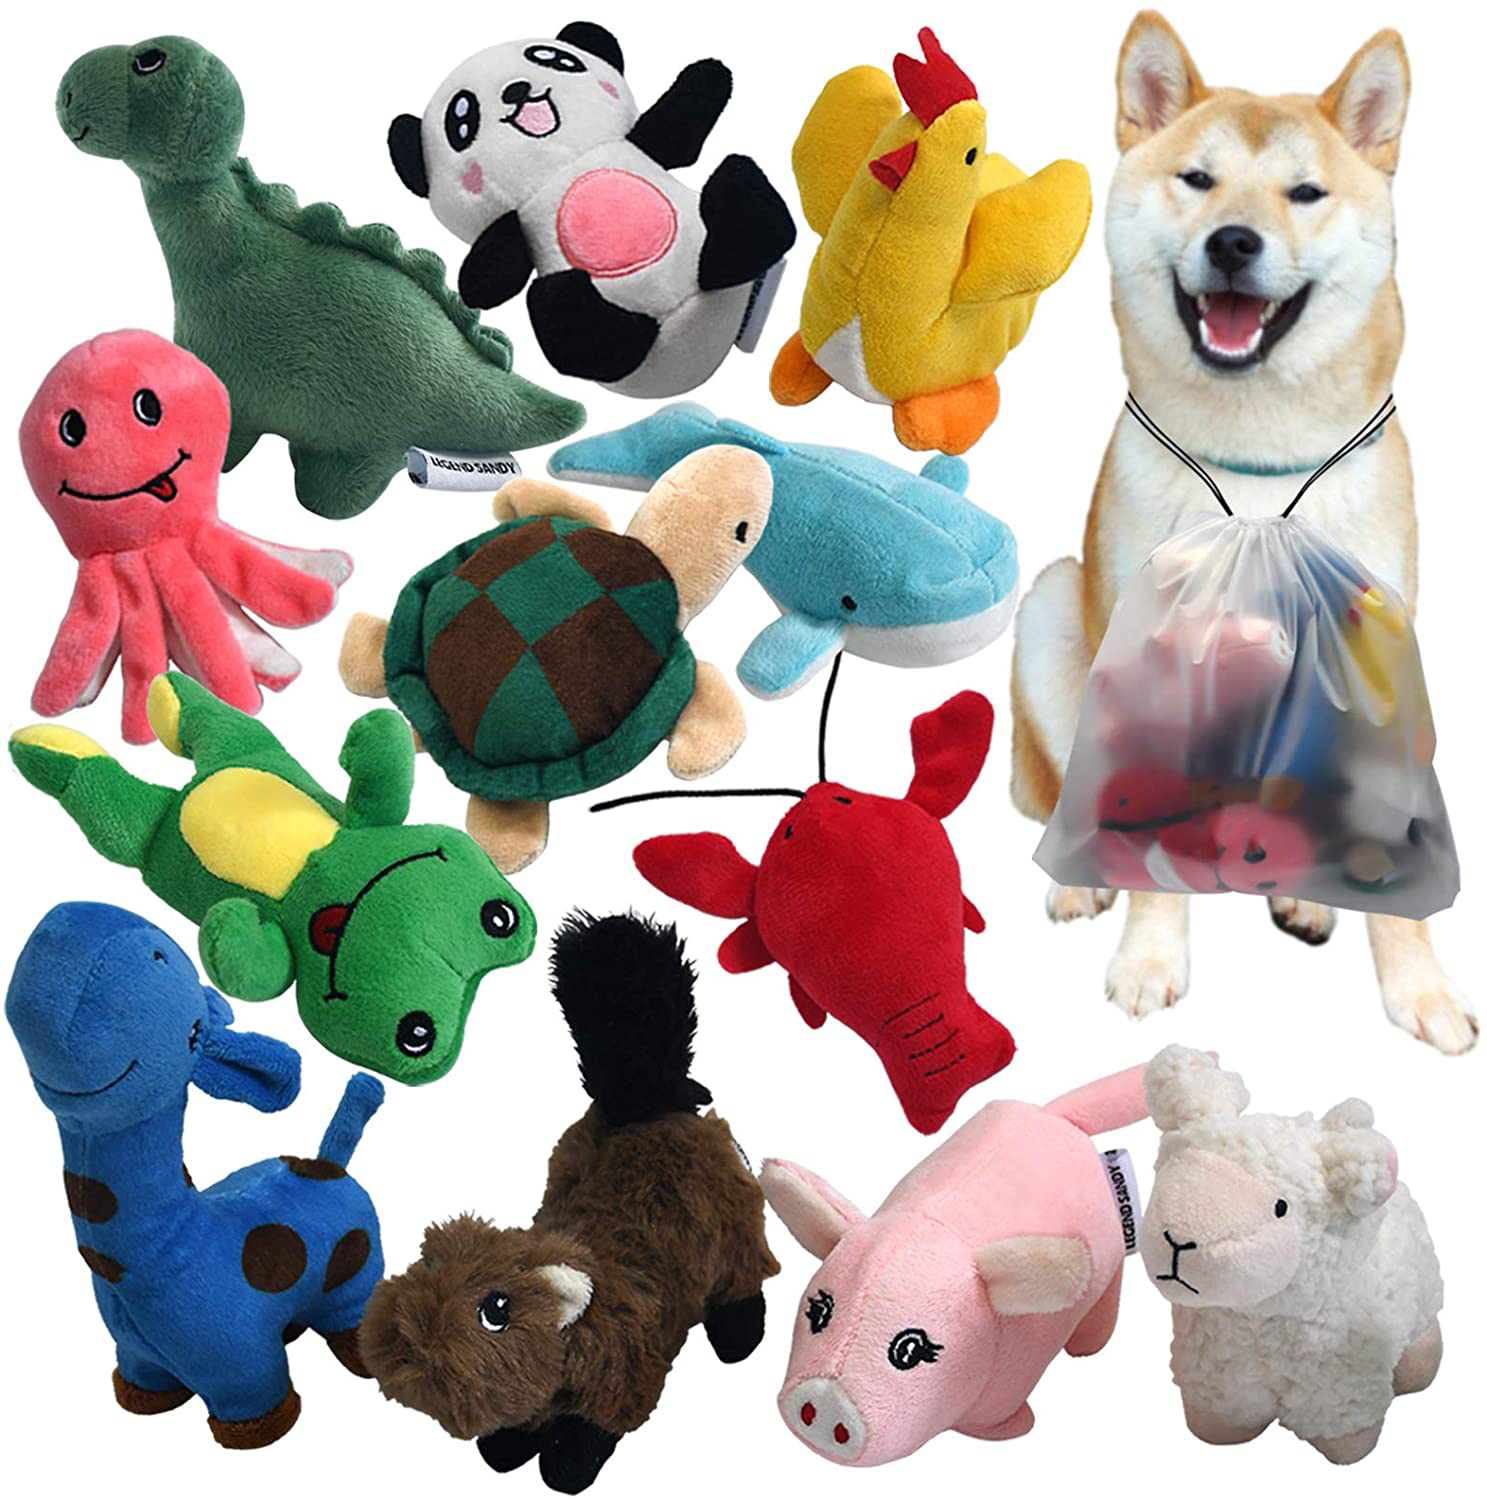 Dog Teething Toys for Puppies - Squeaky Plush for Puppies to Keep